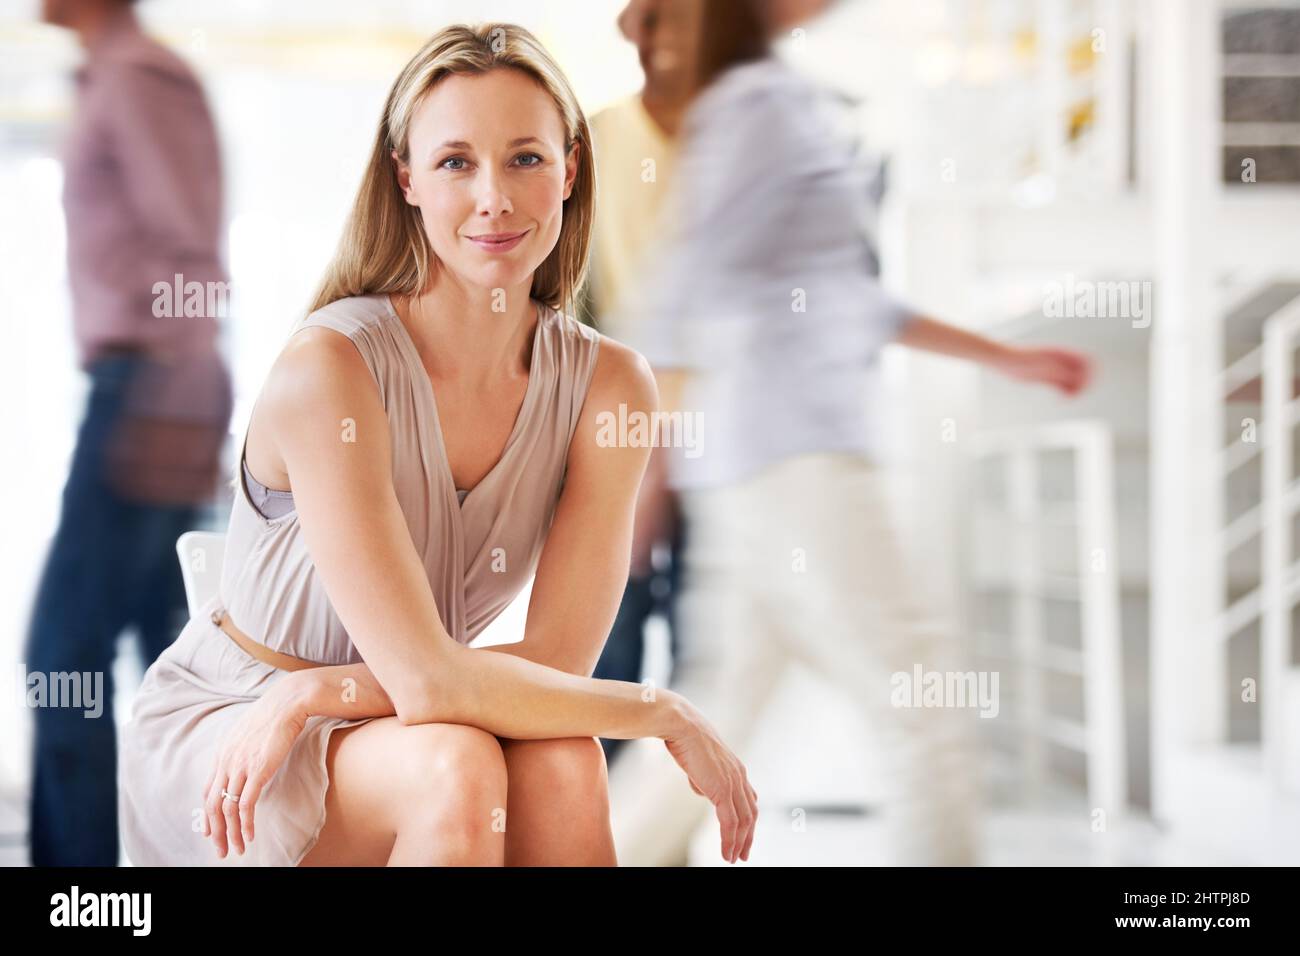 Shes got poise amidst the hustle. A pretty mature businesswoman sitting calmly as his colleagues stream by in haste - conceptual. Stock Photo